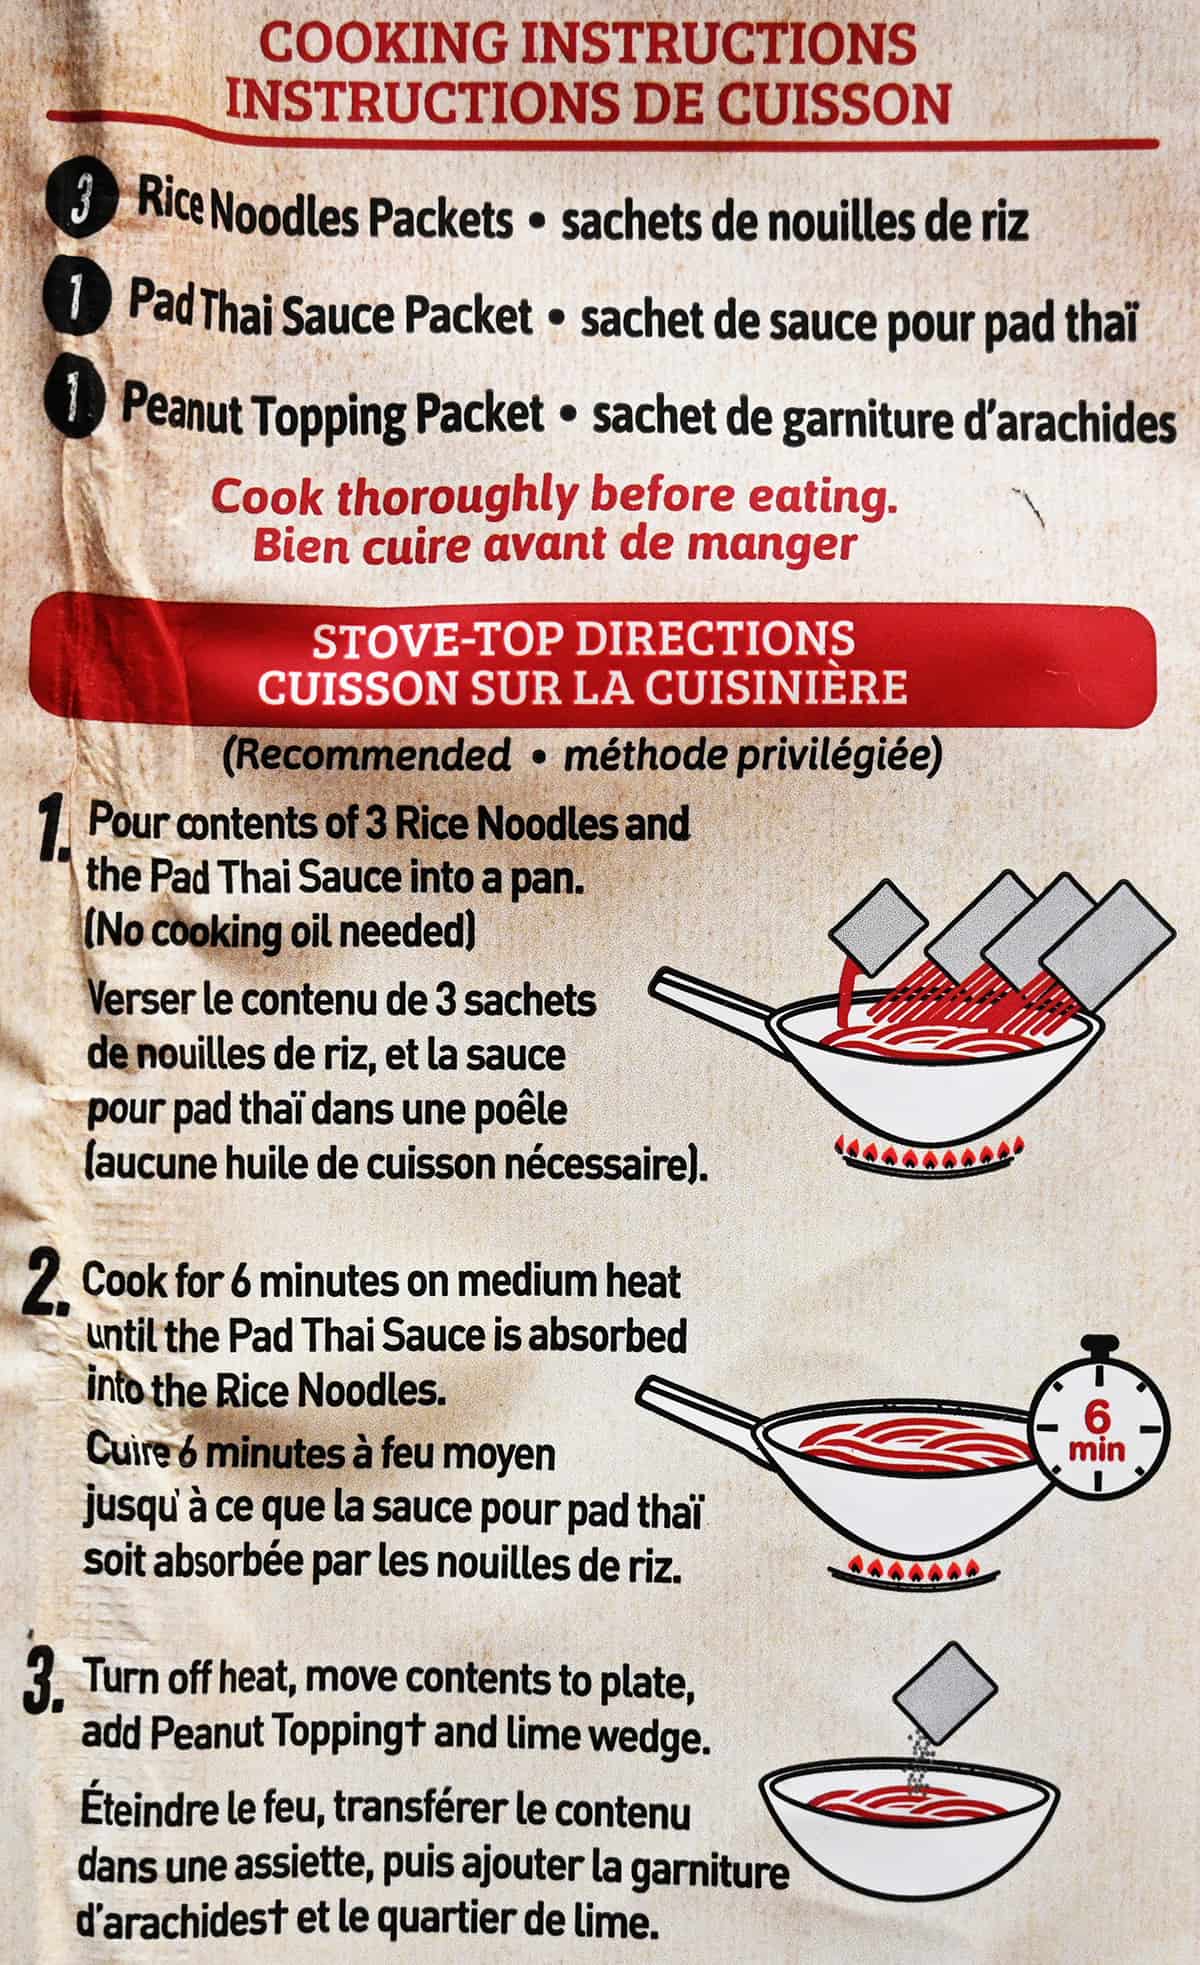 Stove-top cooking instructions for the Pad Thai from the package.